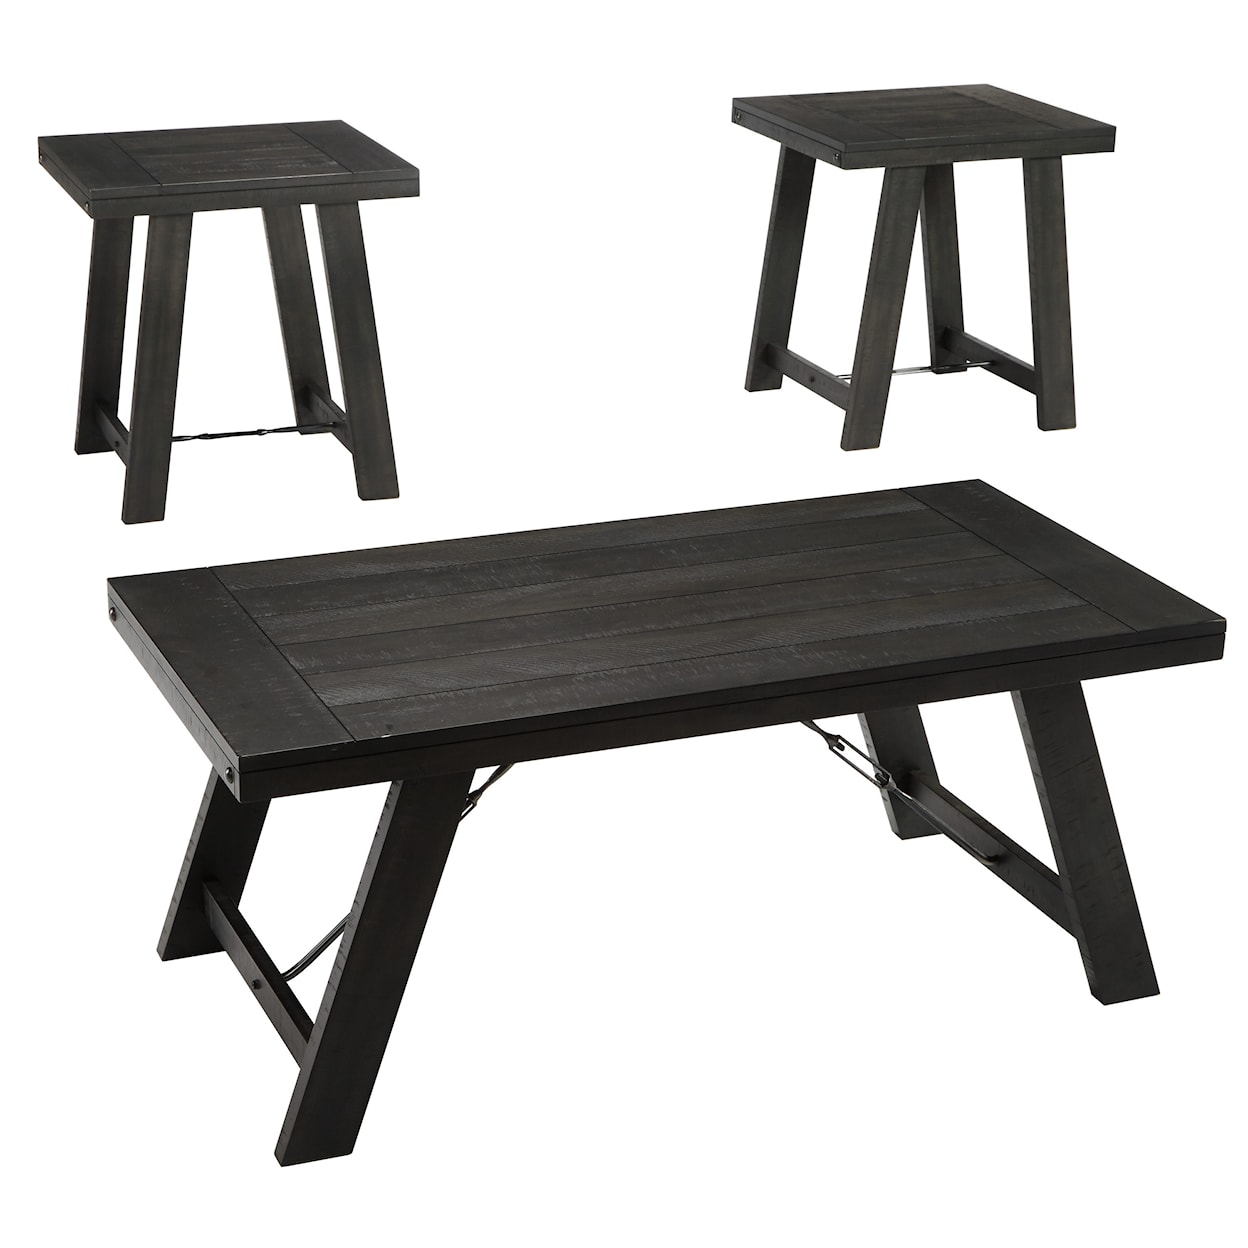 Benchcraft Noorbrook Occasional Table Group